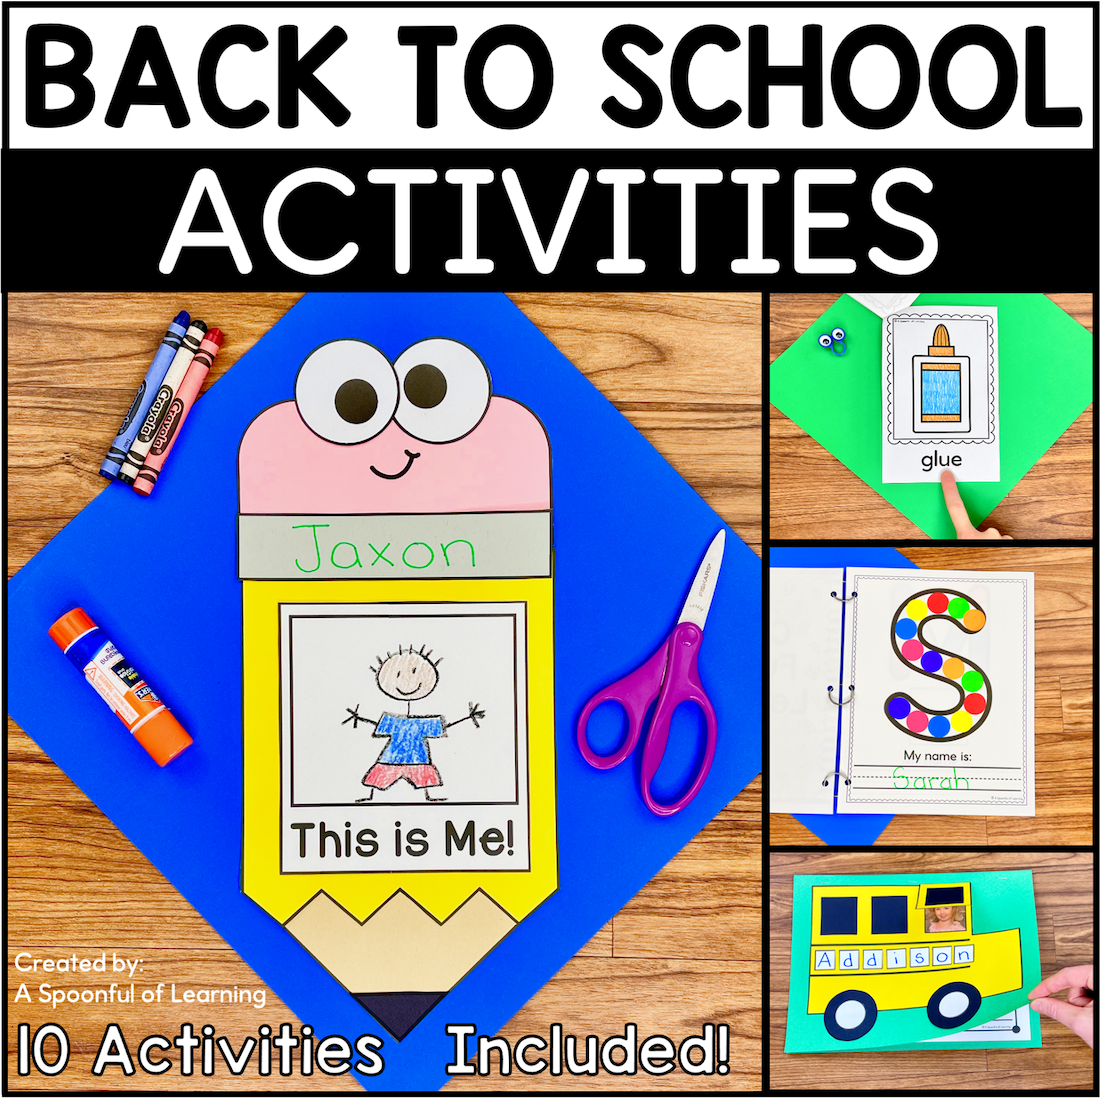 Welcome Back To School Activities For Teachers From Principal - Free ...